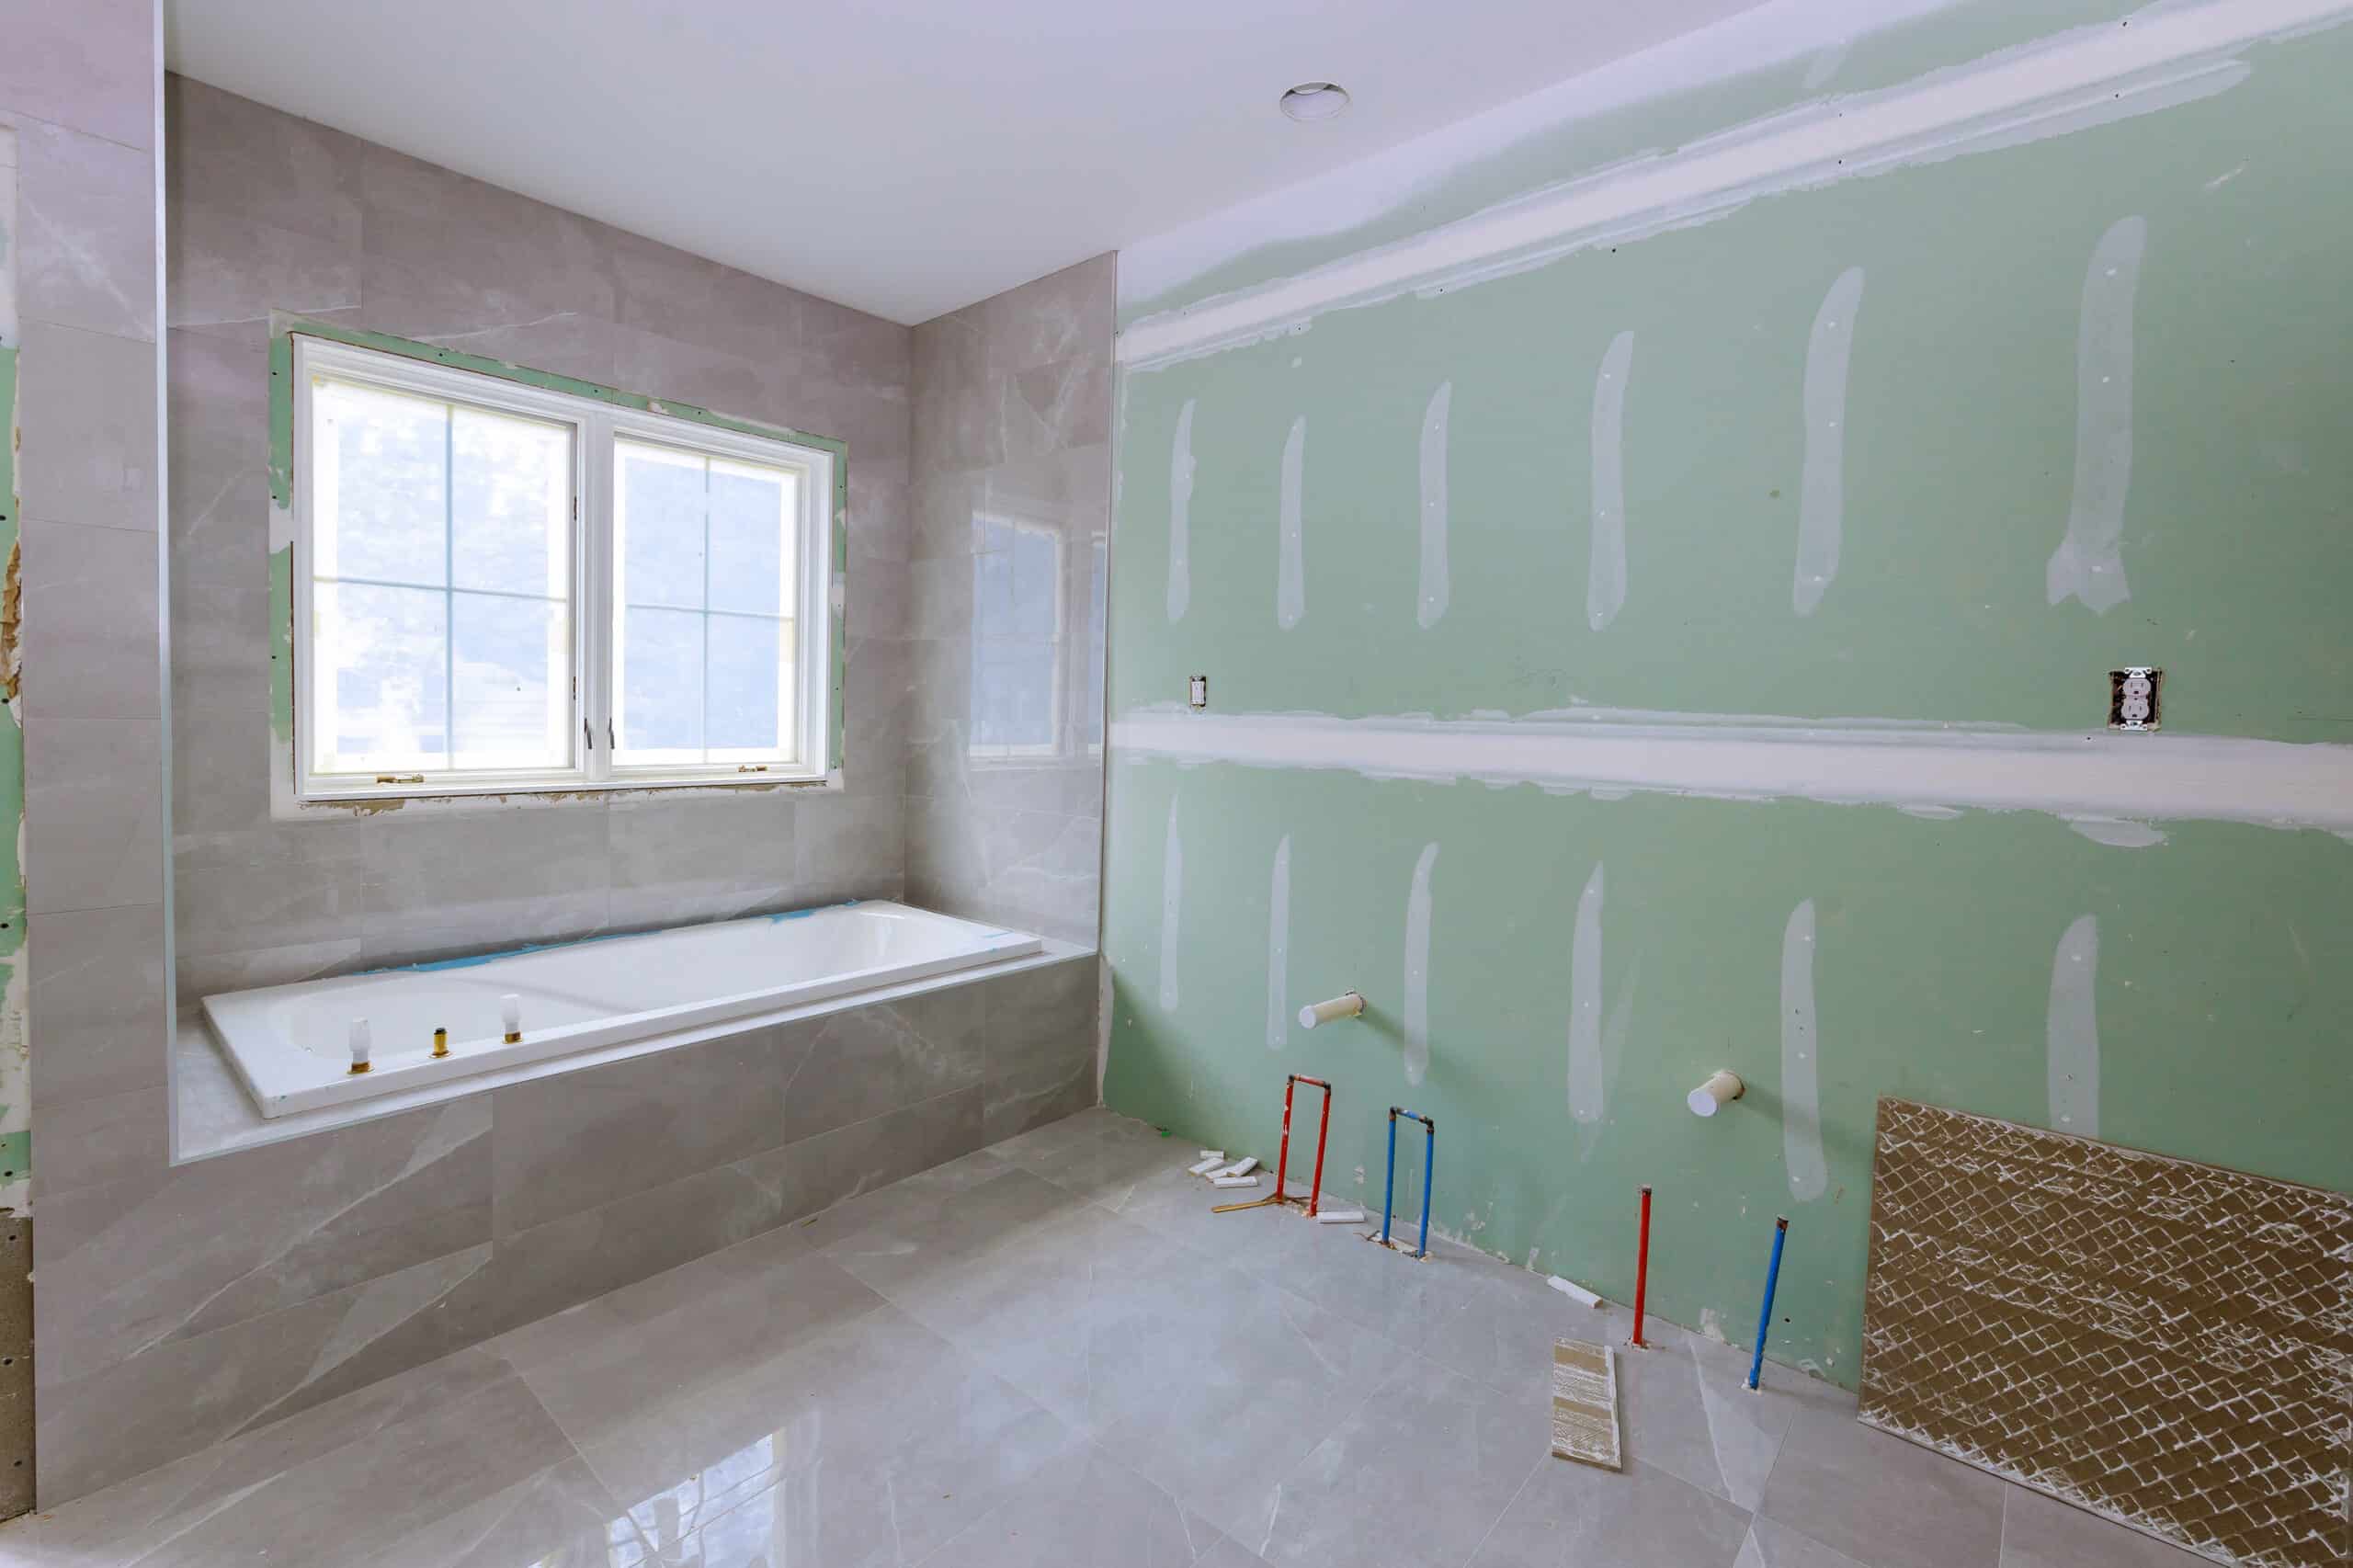 Under,Construction,New,Bathtub,Remodeling,A,Home,Bathroom,,Plumbing,Pipe